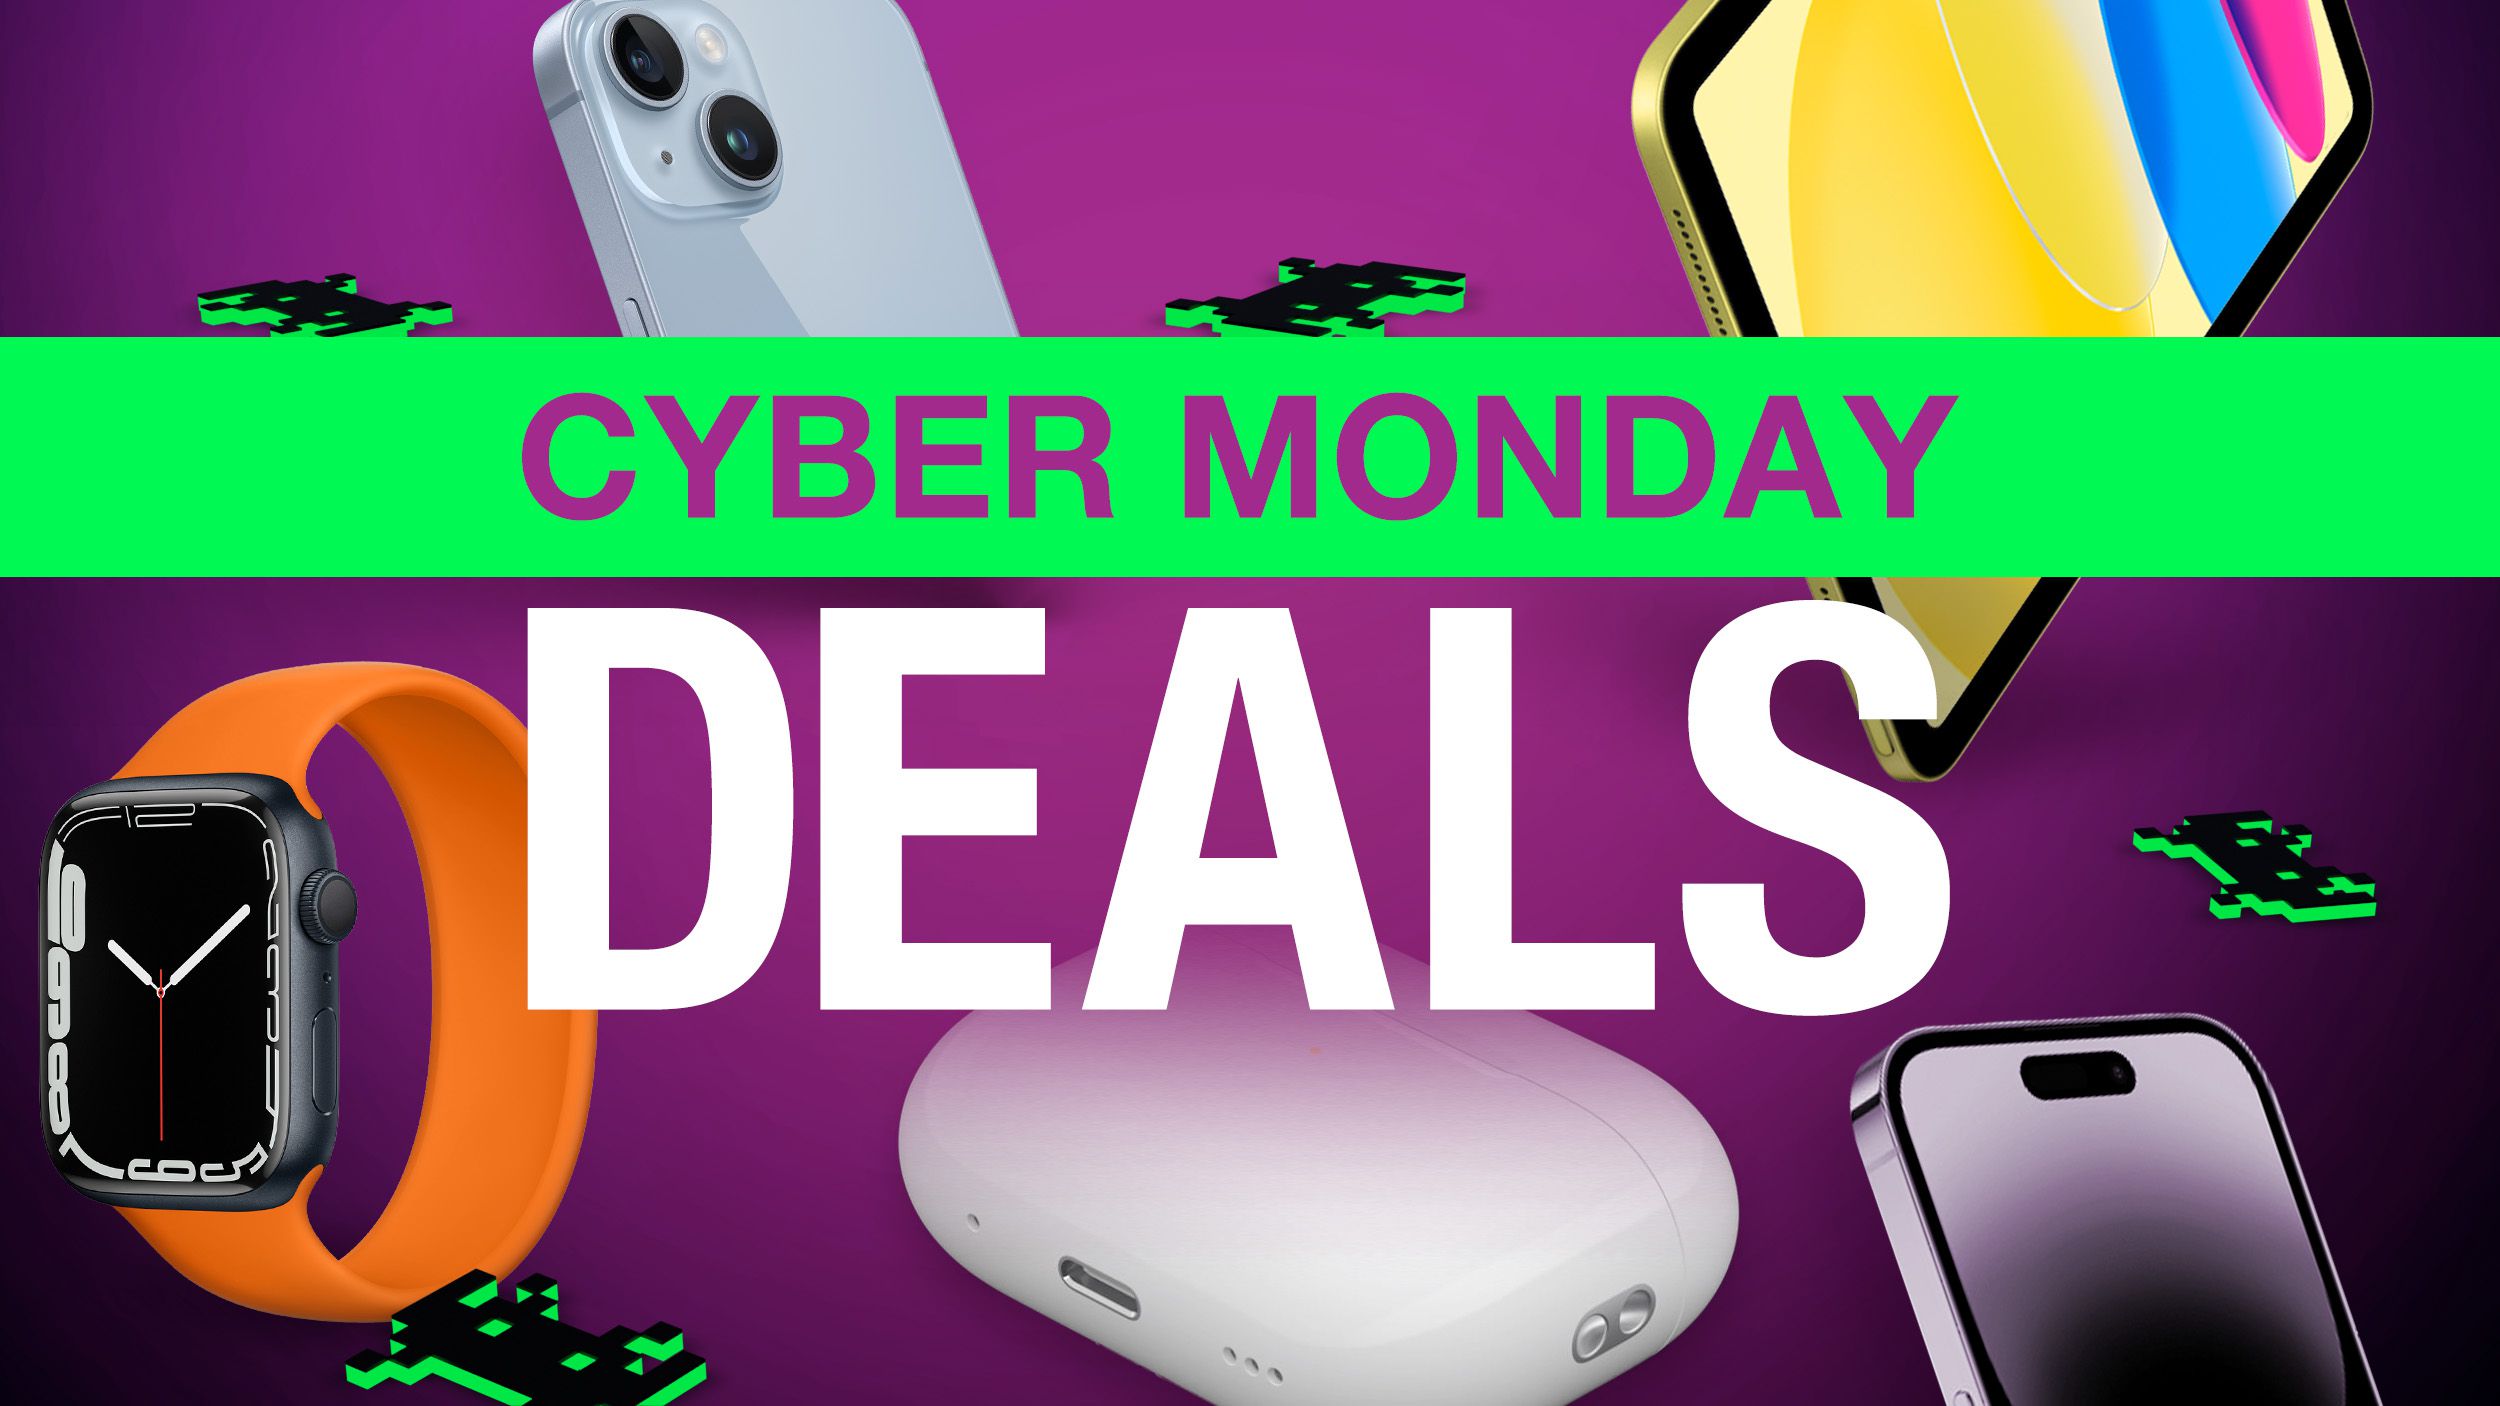 40+ Apple Cyber Monday Deals for AirPods, iPad, Apple Watch, and More